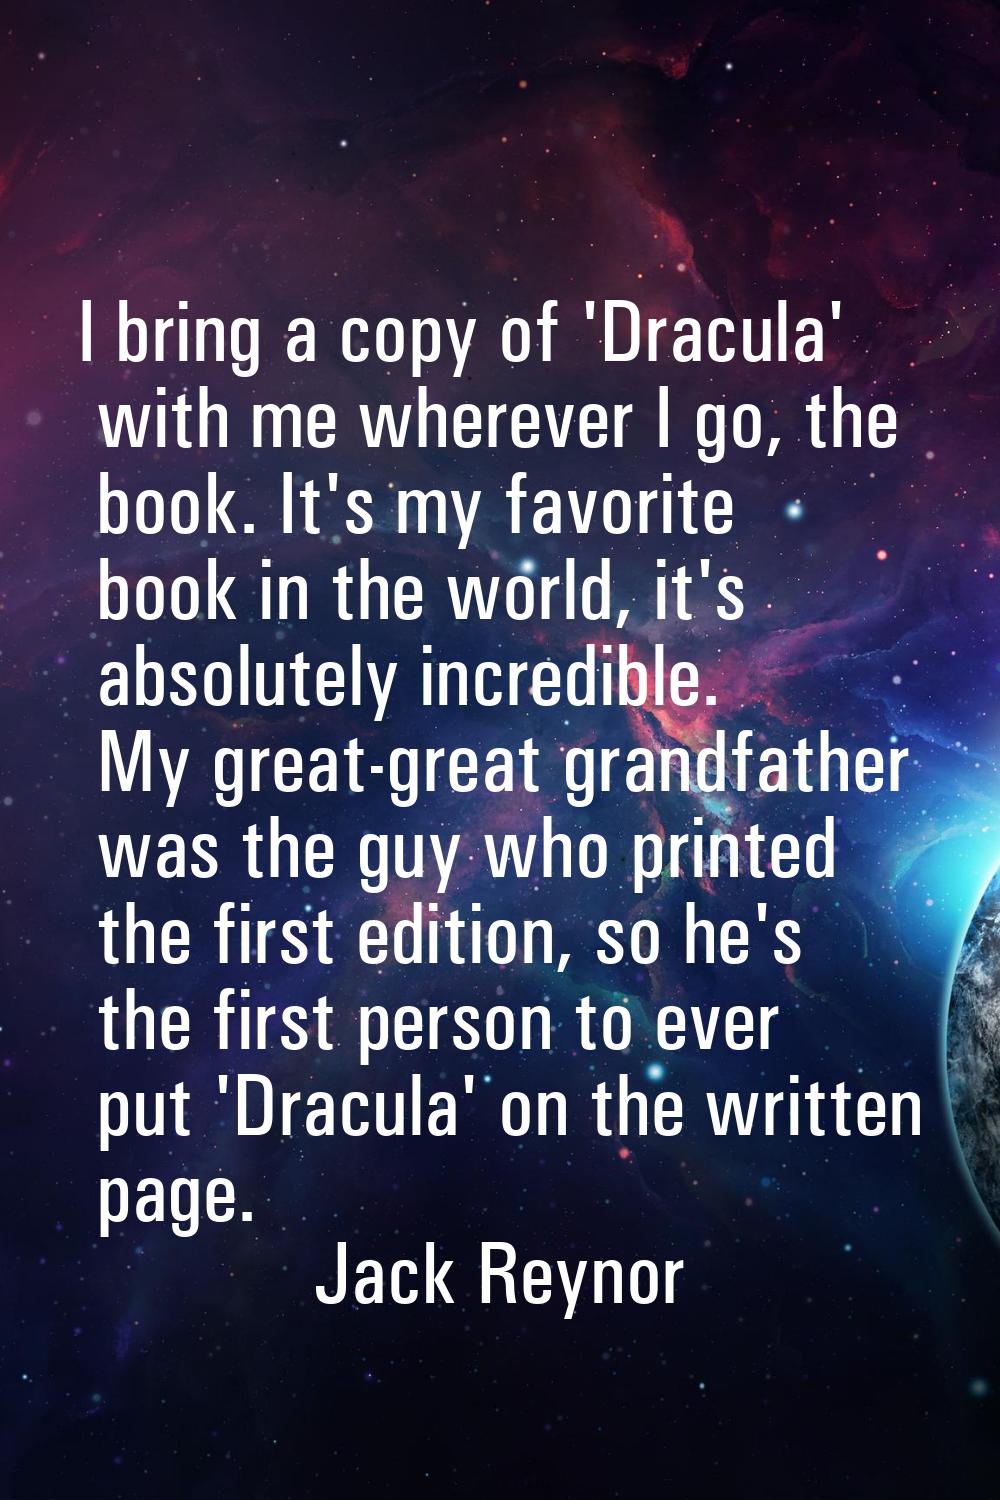 I bring a copy of 'Dracula' with me wherever I go, the book. It's my favorite book in the world, it